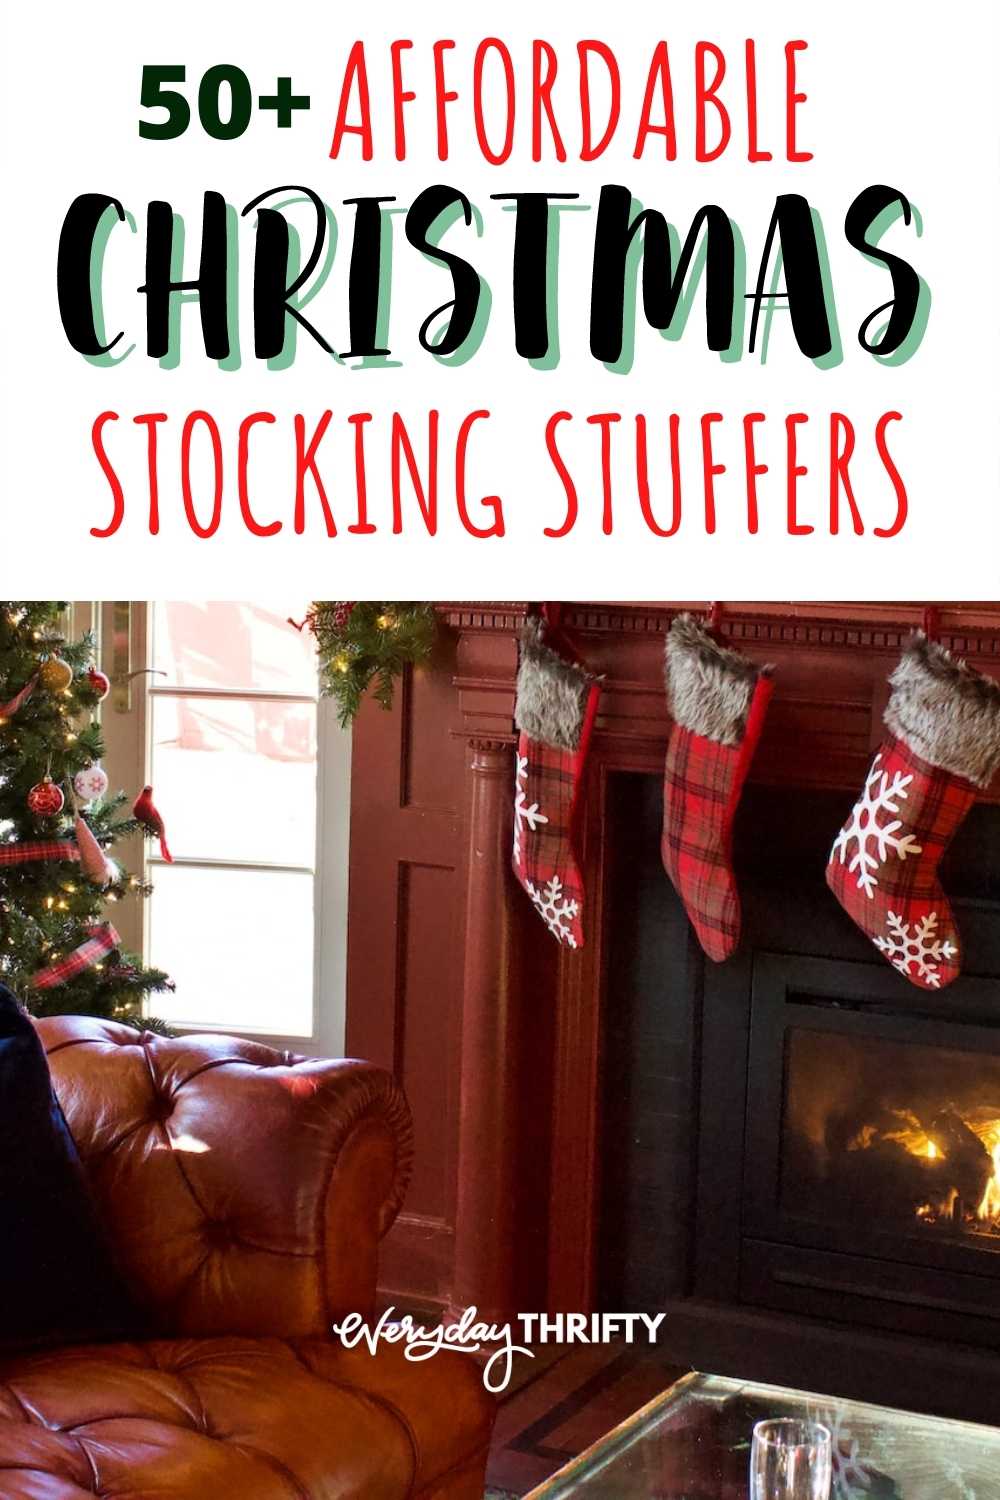 Get more than 50 ideas of stocking stuffers you can get, including ideas for the whole family. 